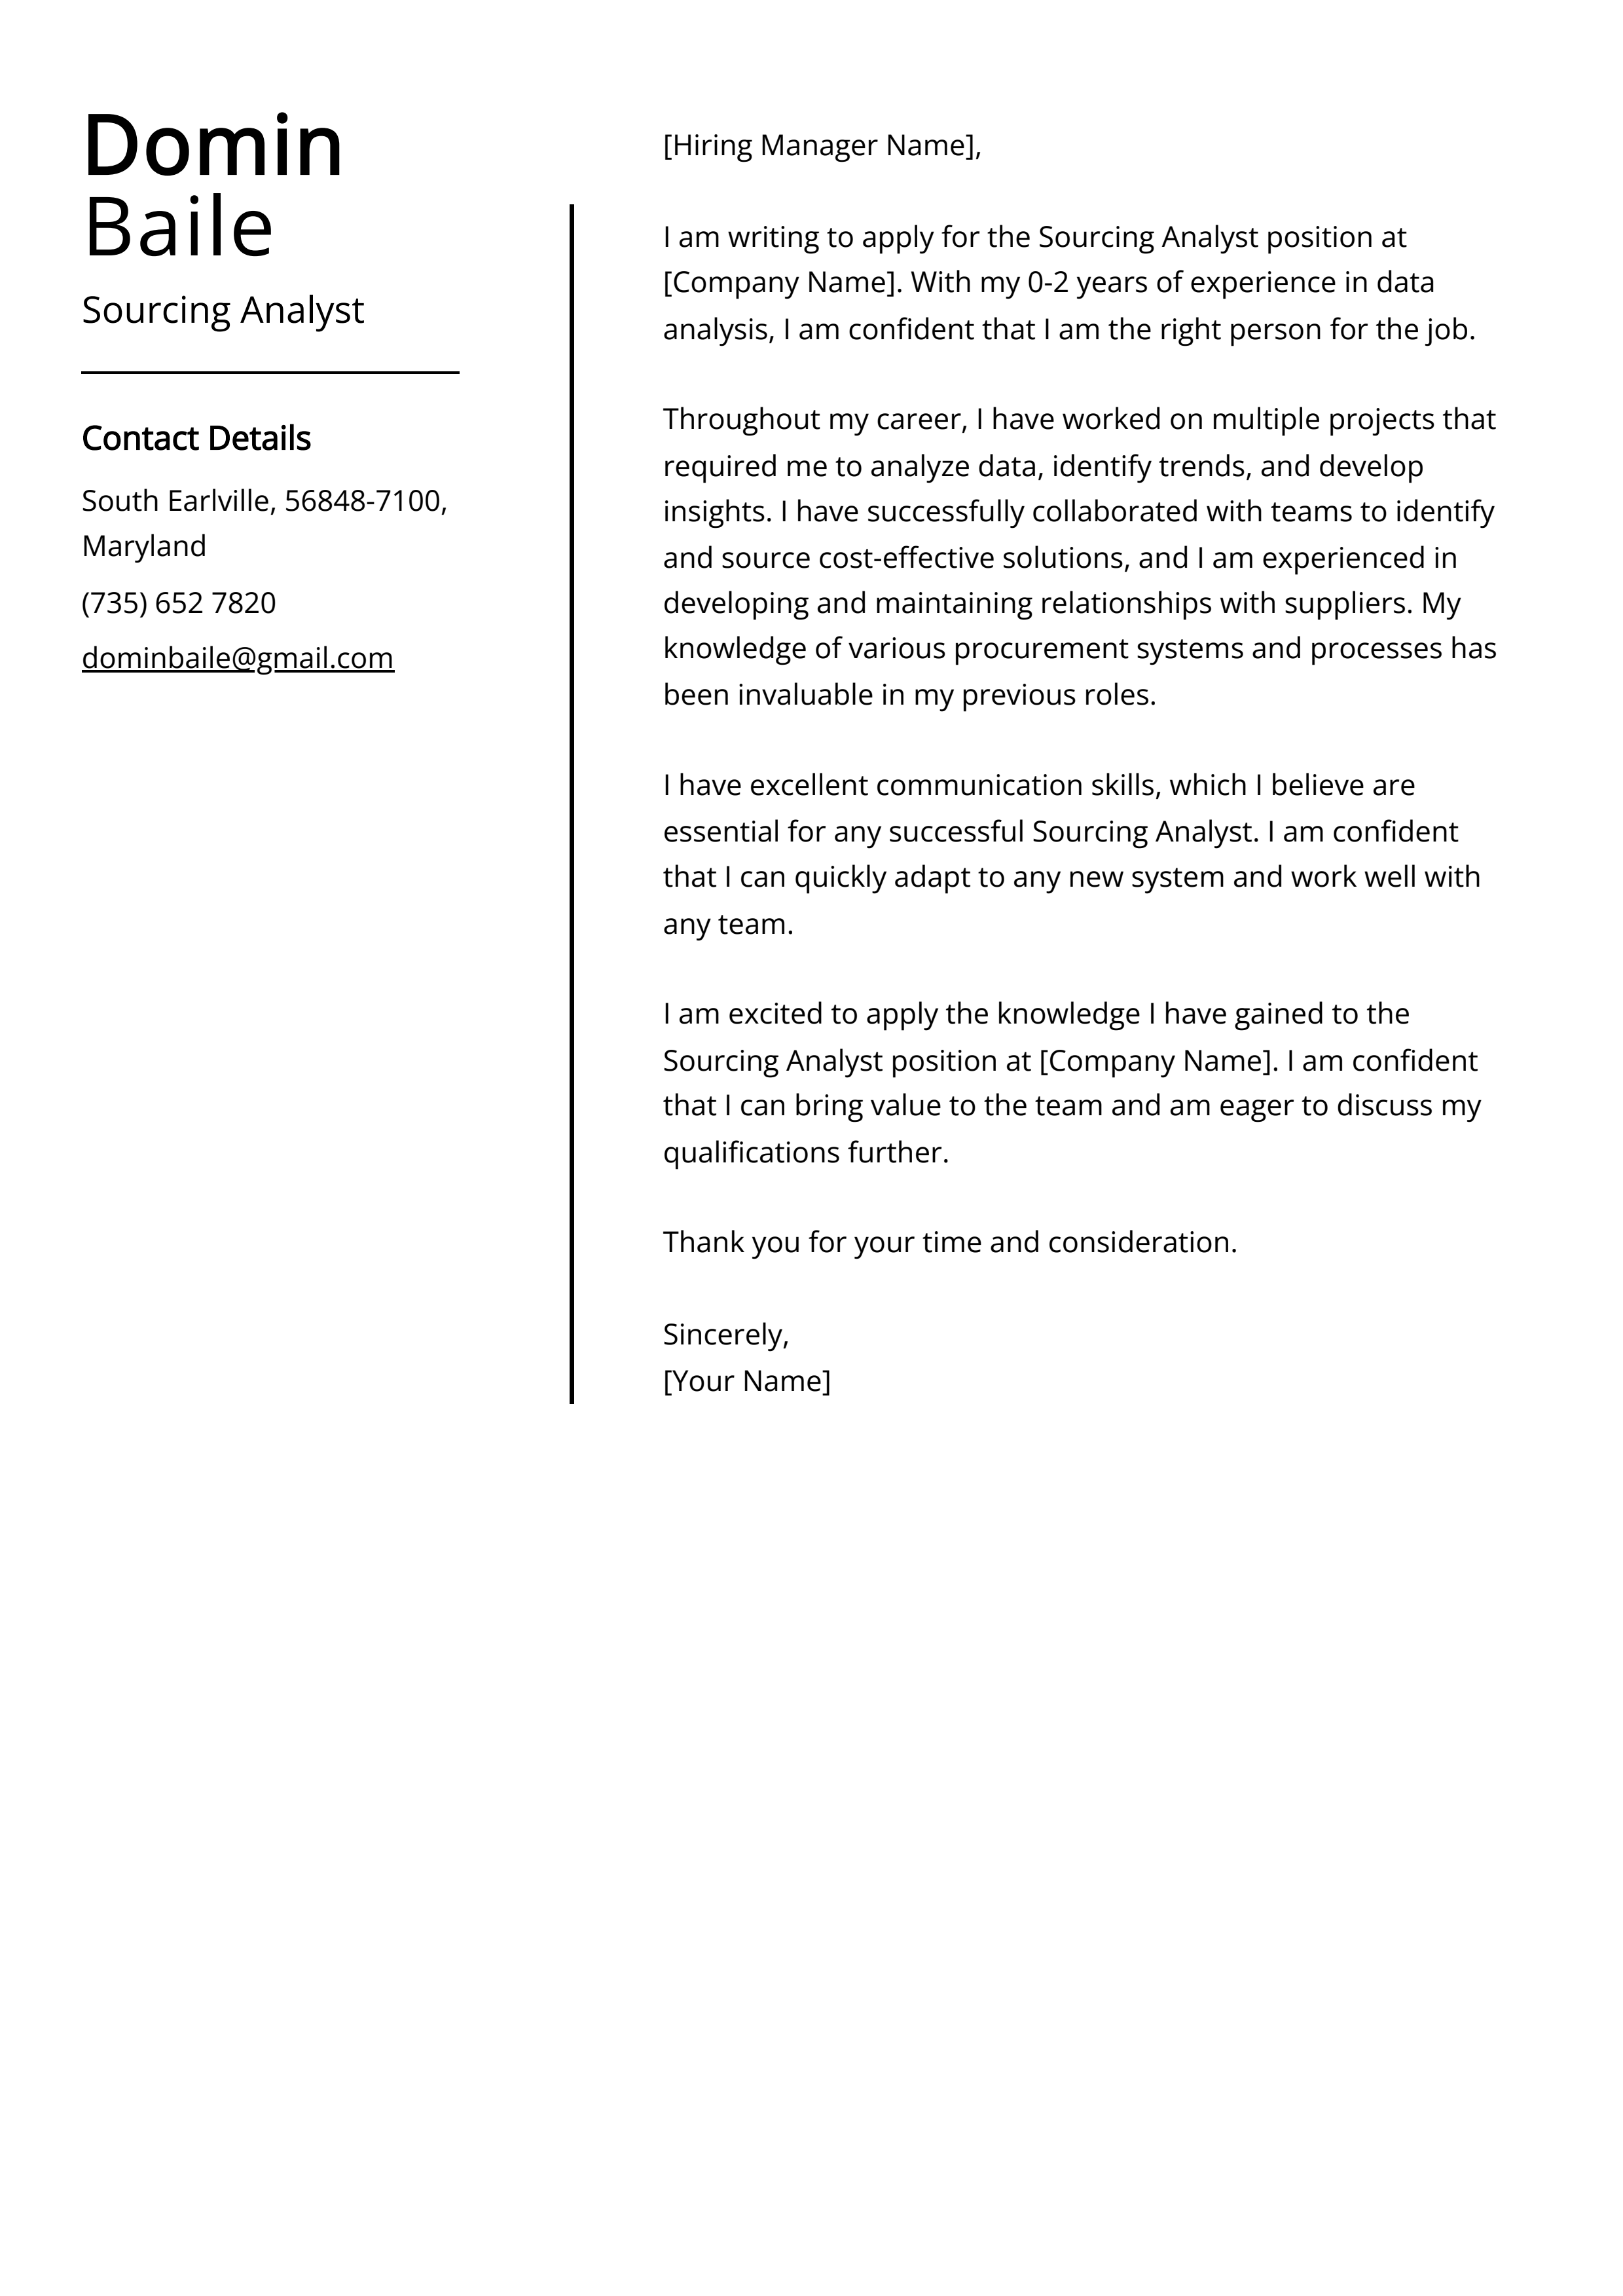 Sourcing Analyst Cover Letter Example